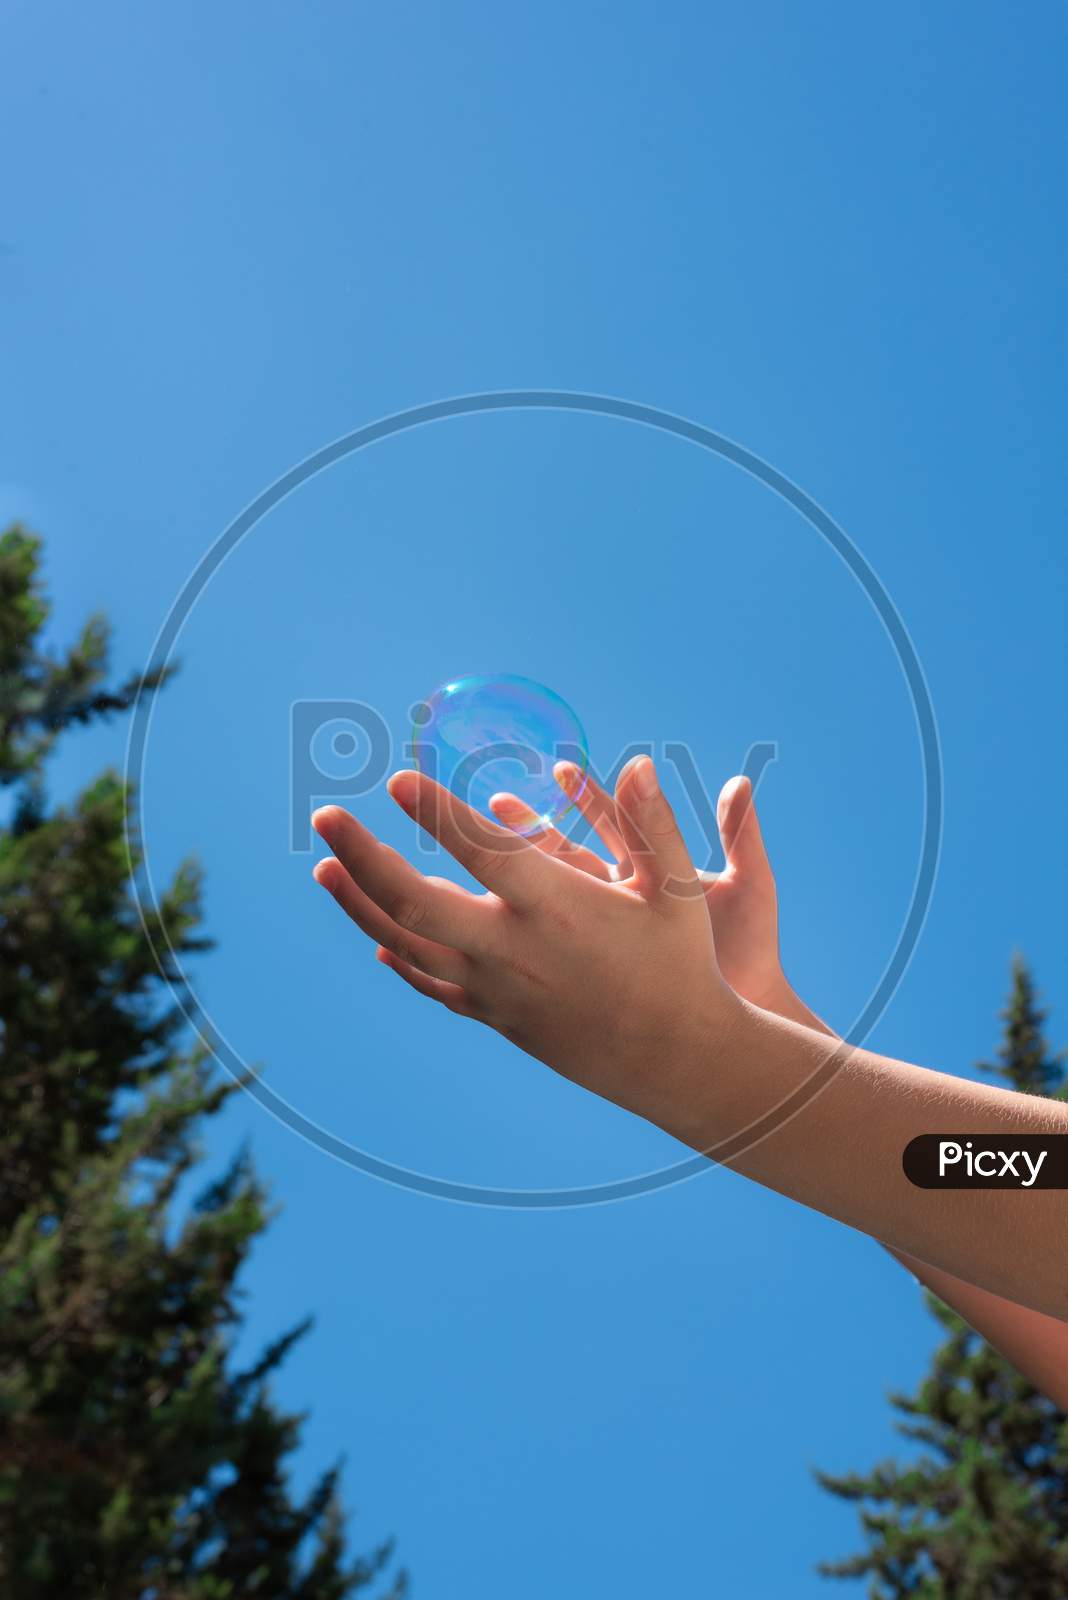 A Bubble Soap In Children Hands Against A Blue Sky